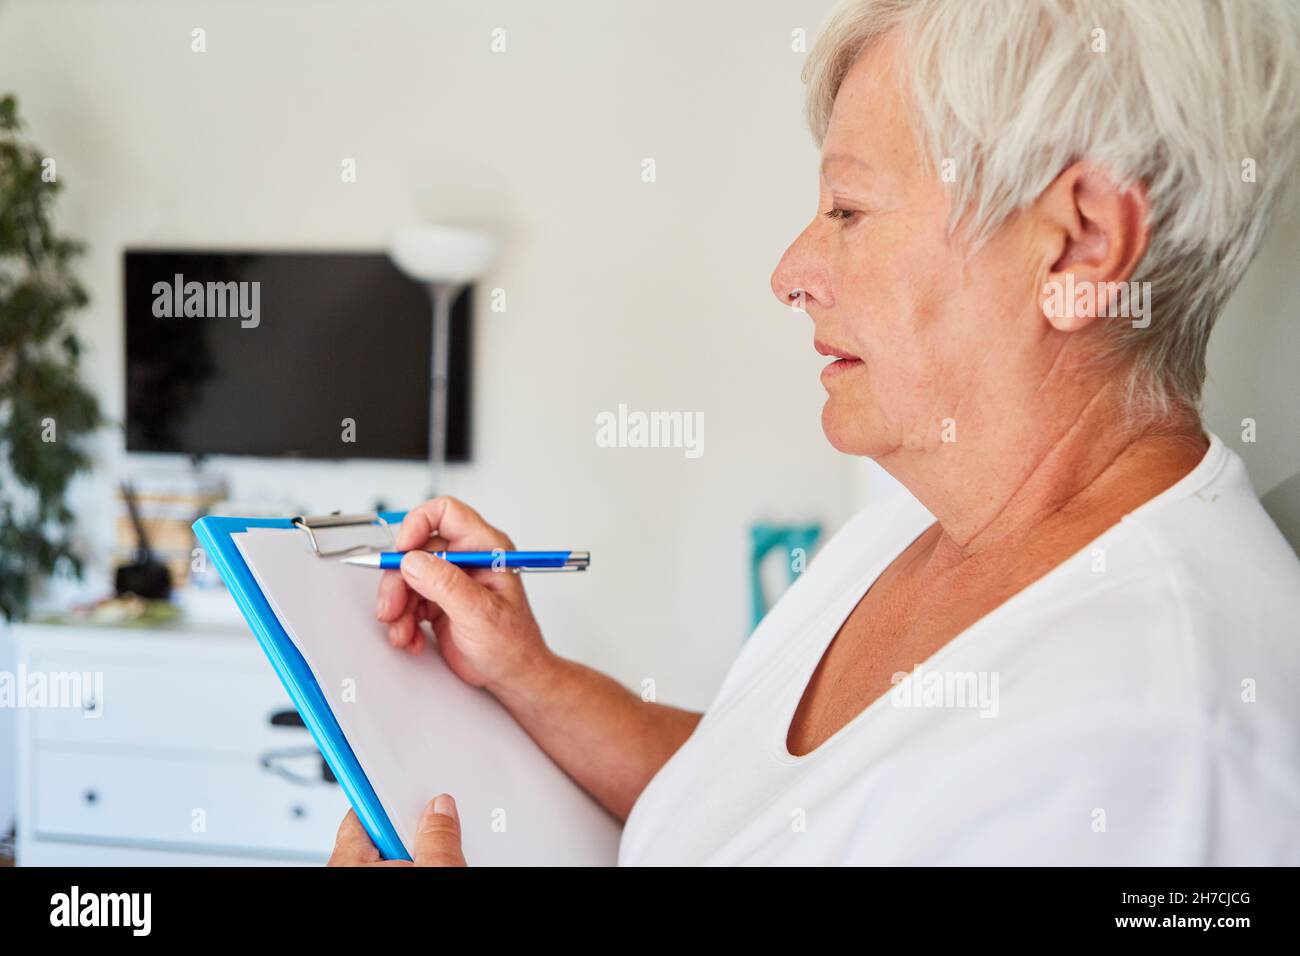 Home supervision uses a checklist on the clipboard to check cleanliness and hygiene in the nursing home Stock Photo